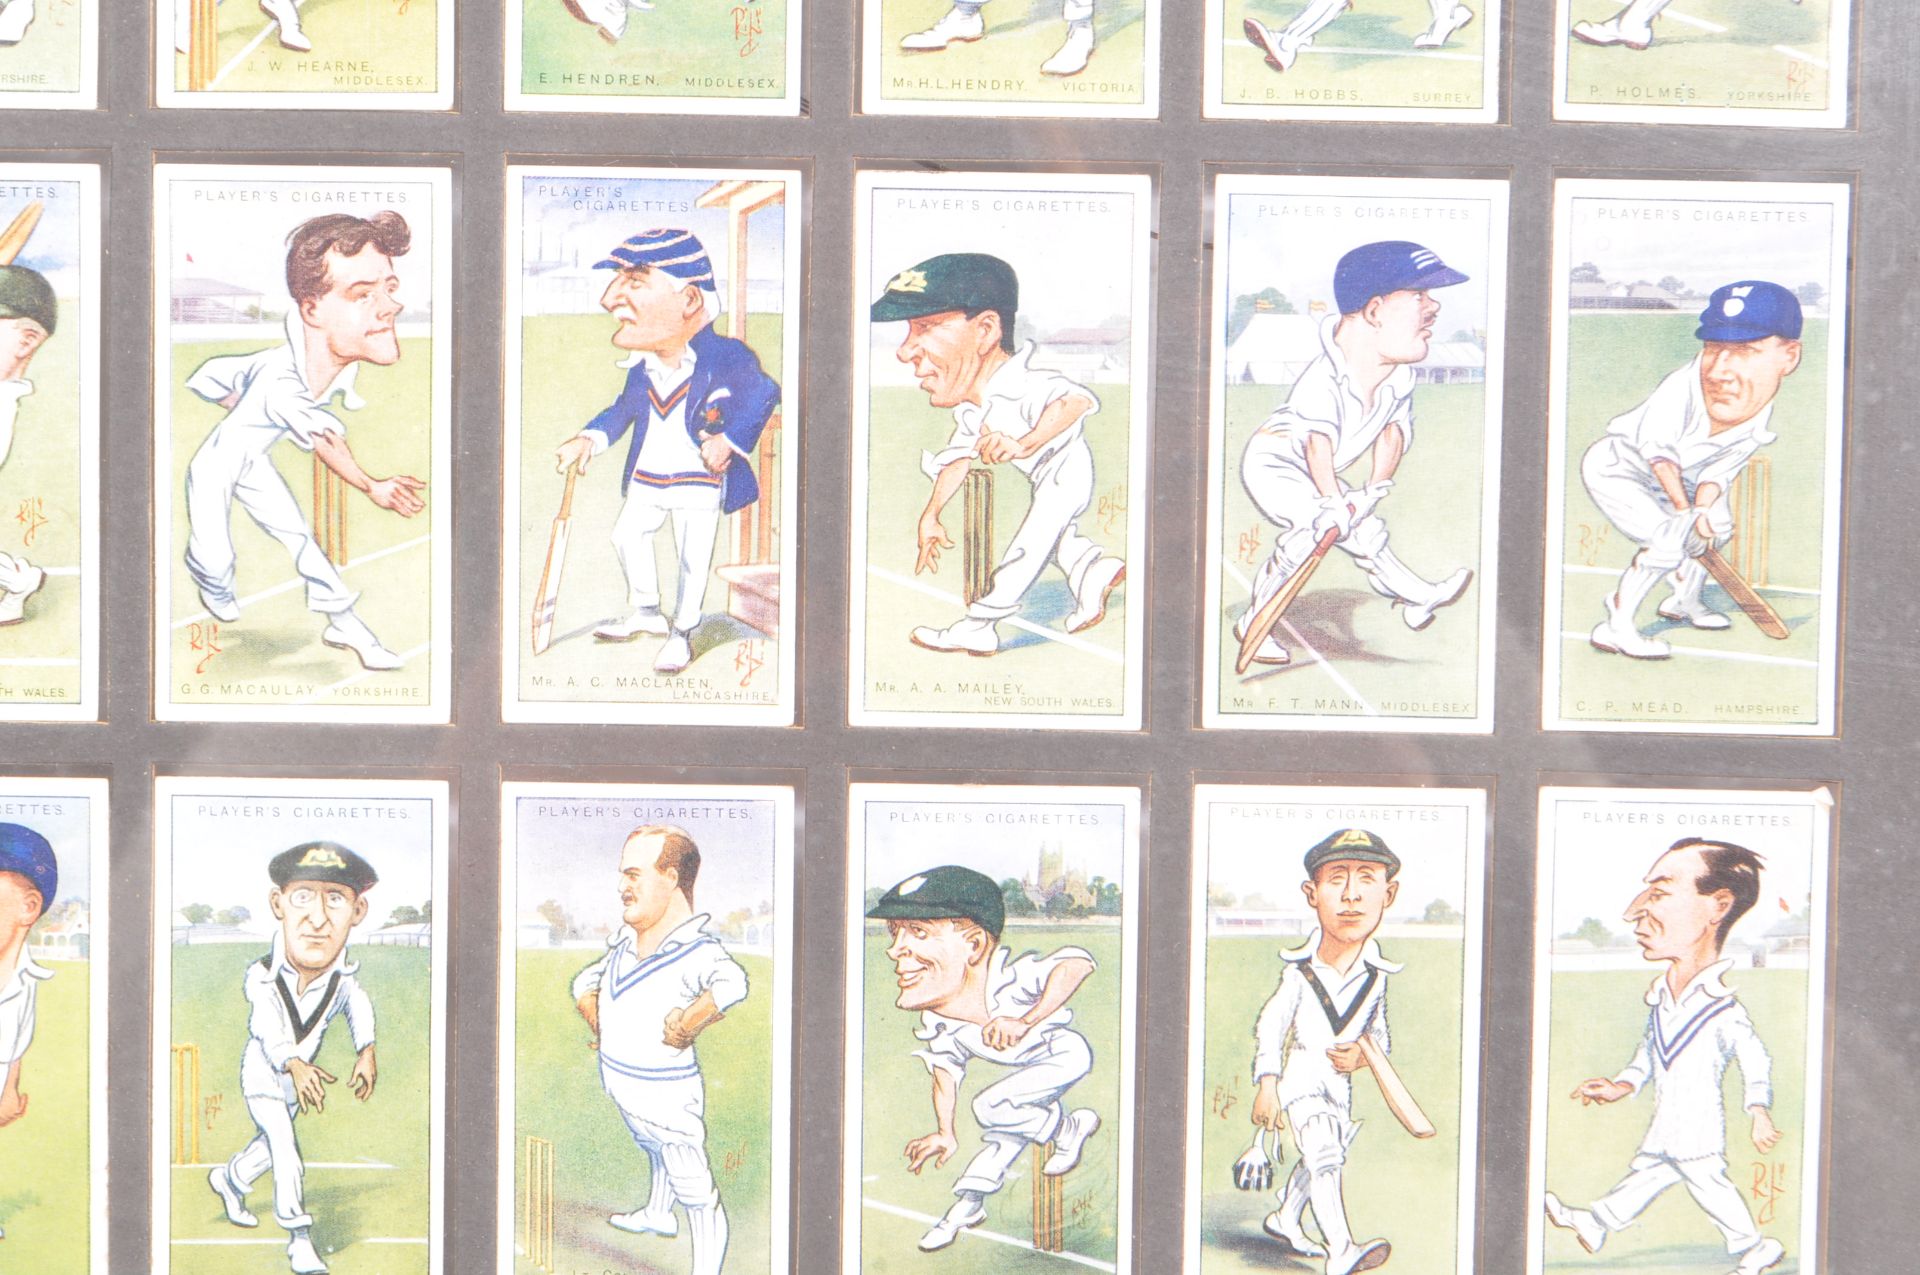 PLAYERS CIGARETTES - COLLECTION OF CRICKET CIGARETTE CARDS - Image 5 of 8